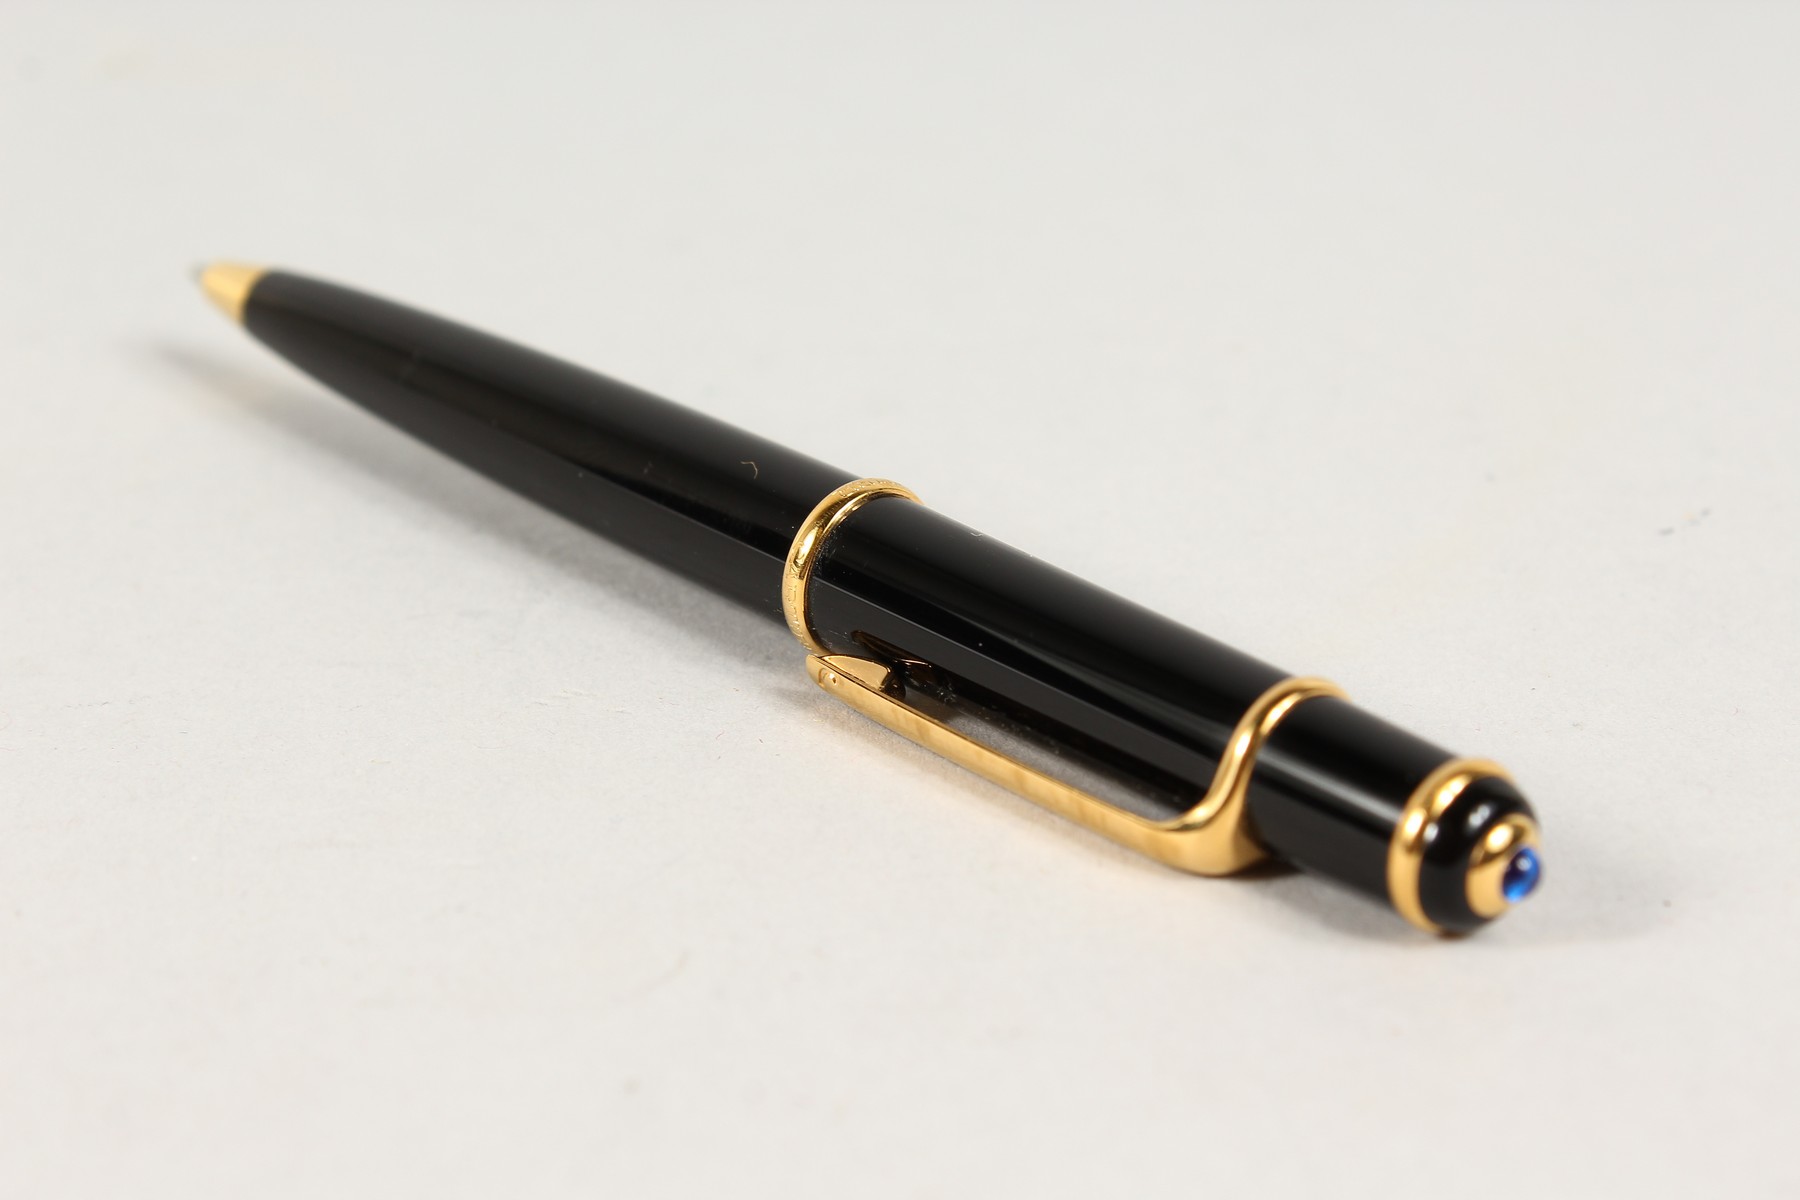 A CARTIER PEN in a leather case. - Image 2 of 4